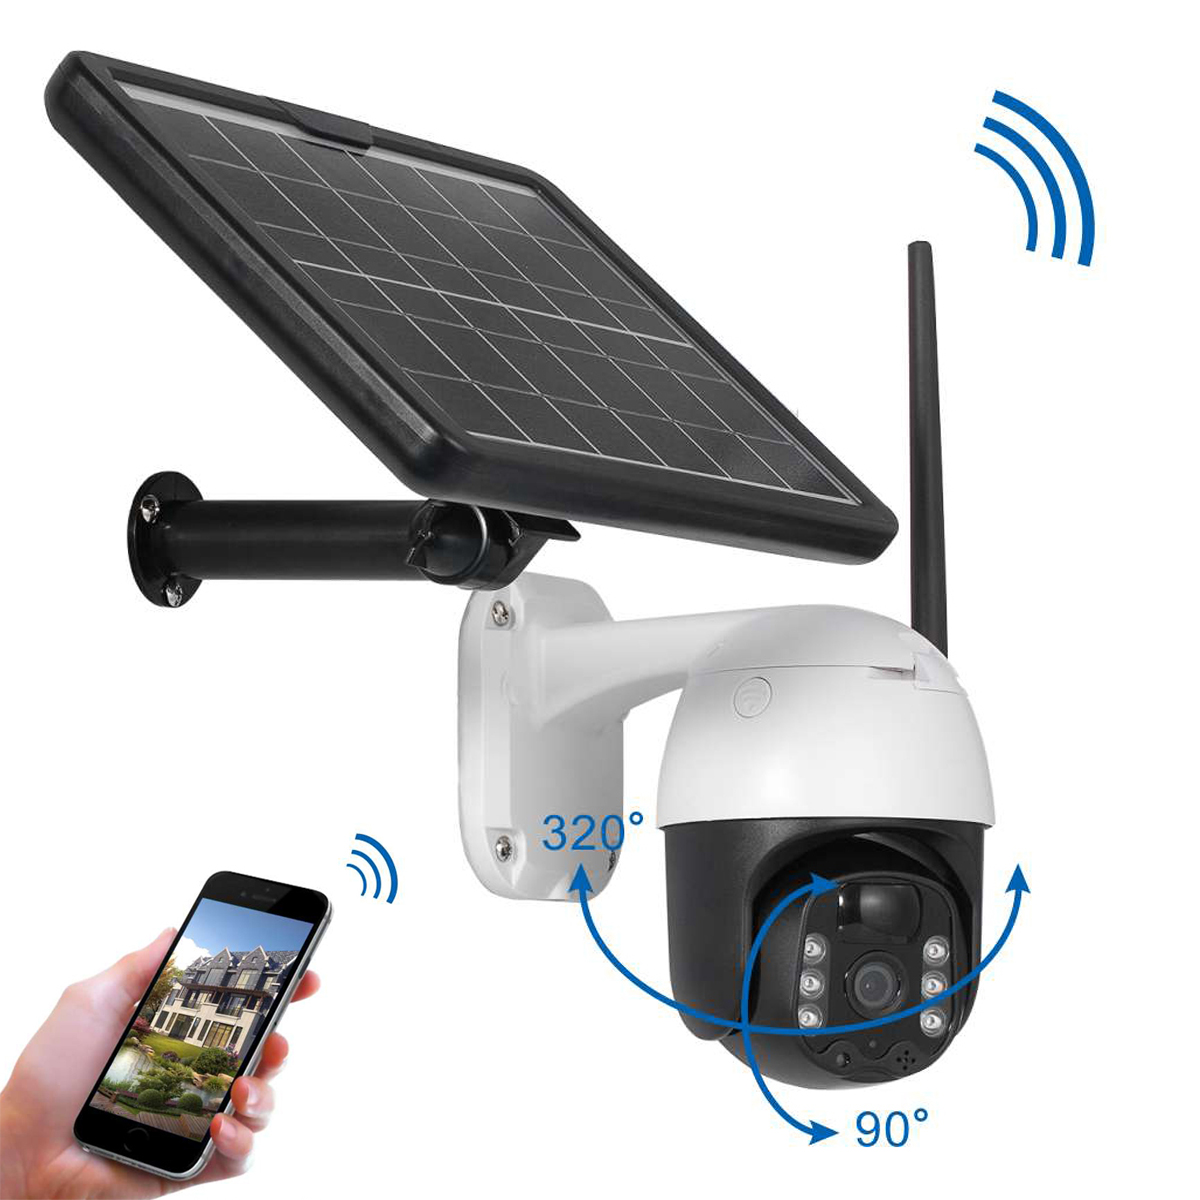 Outdoor Wireless WiFi Pan Tilt  View Spotlight Rechargeable Solar Battery Powered Home Security 4G Camera Featured Image